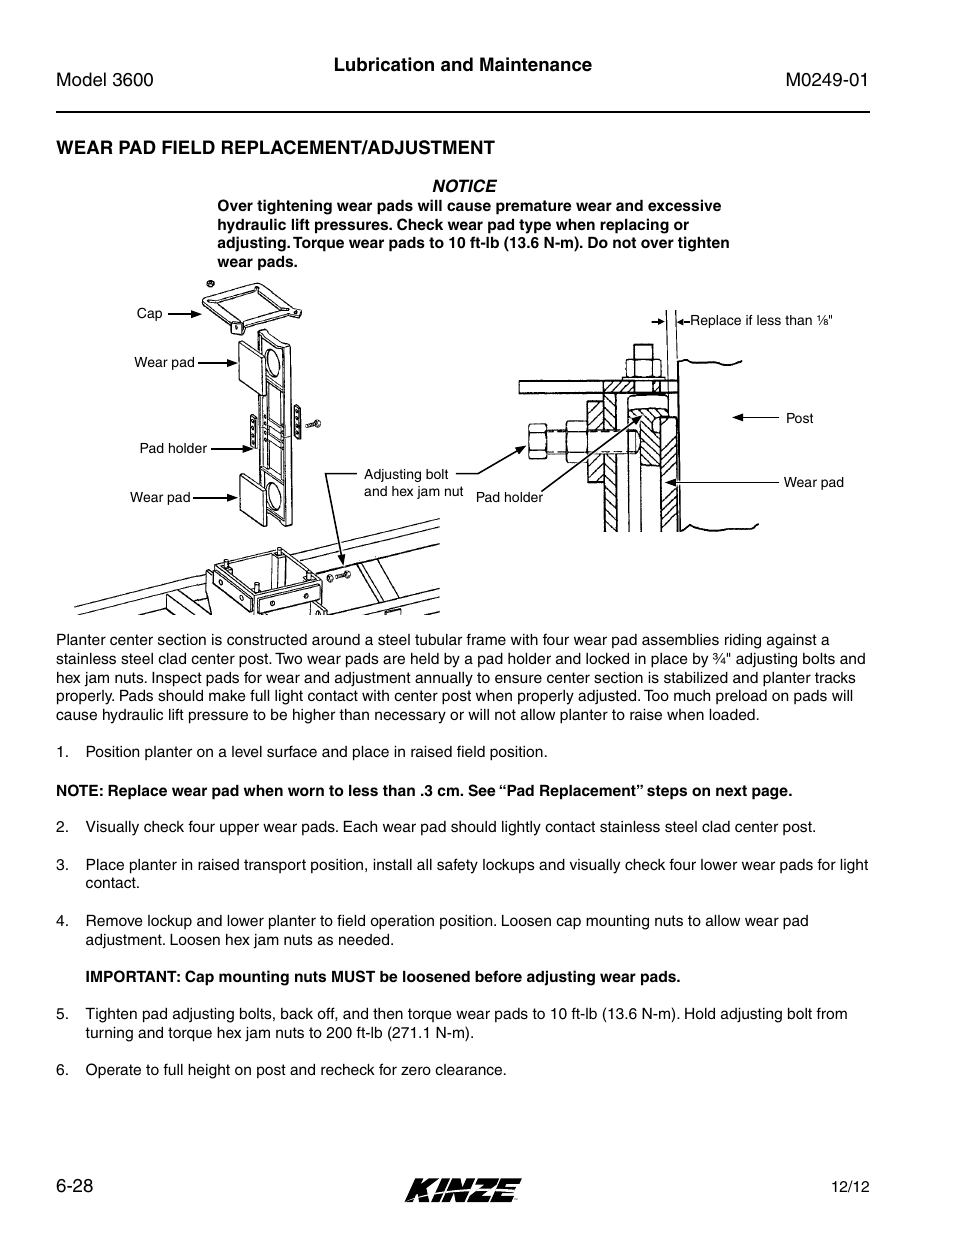 Wear pad field replacement/adjustment, Wear pad field replacement/adjustment -28 | Kinze 3600 Lift and Rotate Planter (70 CM) Rev. 5/14 User Manual | Page 132 / 158